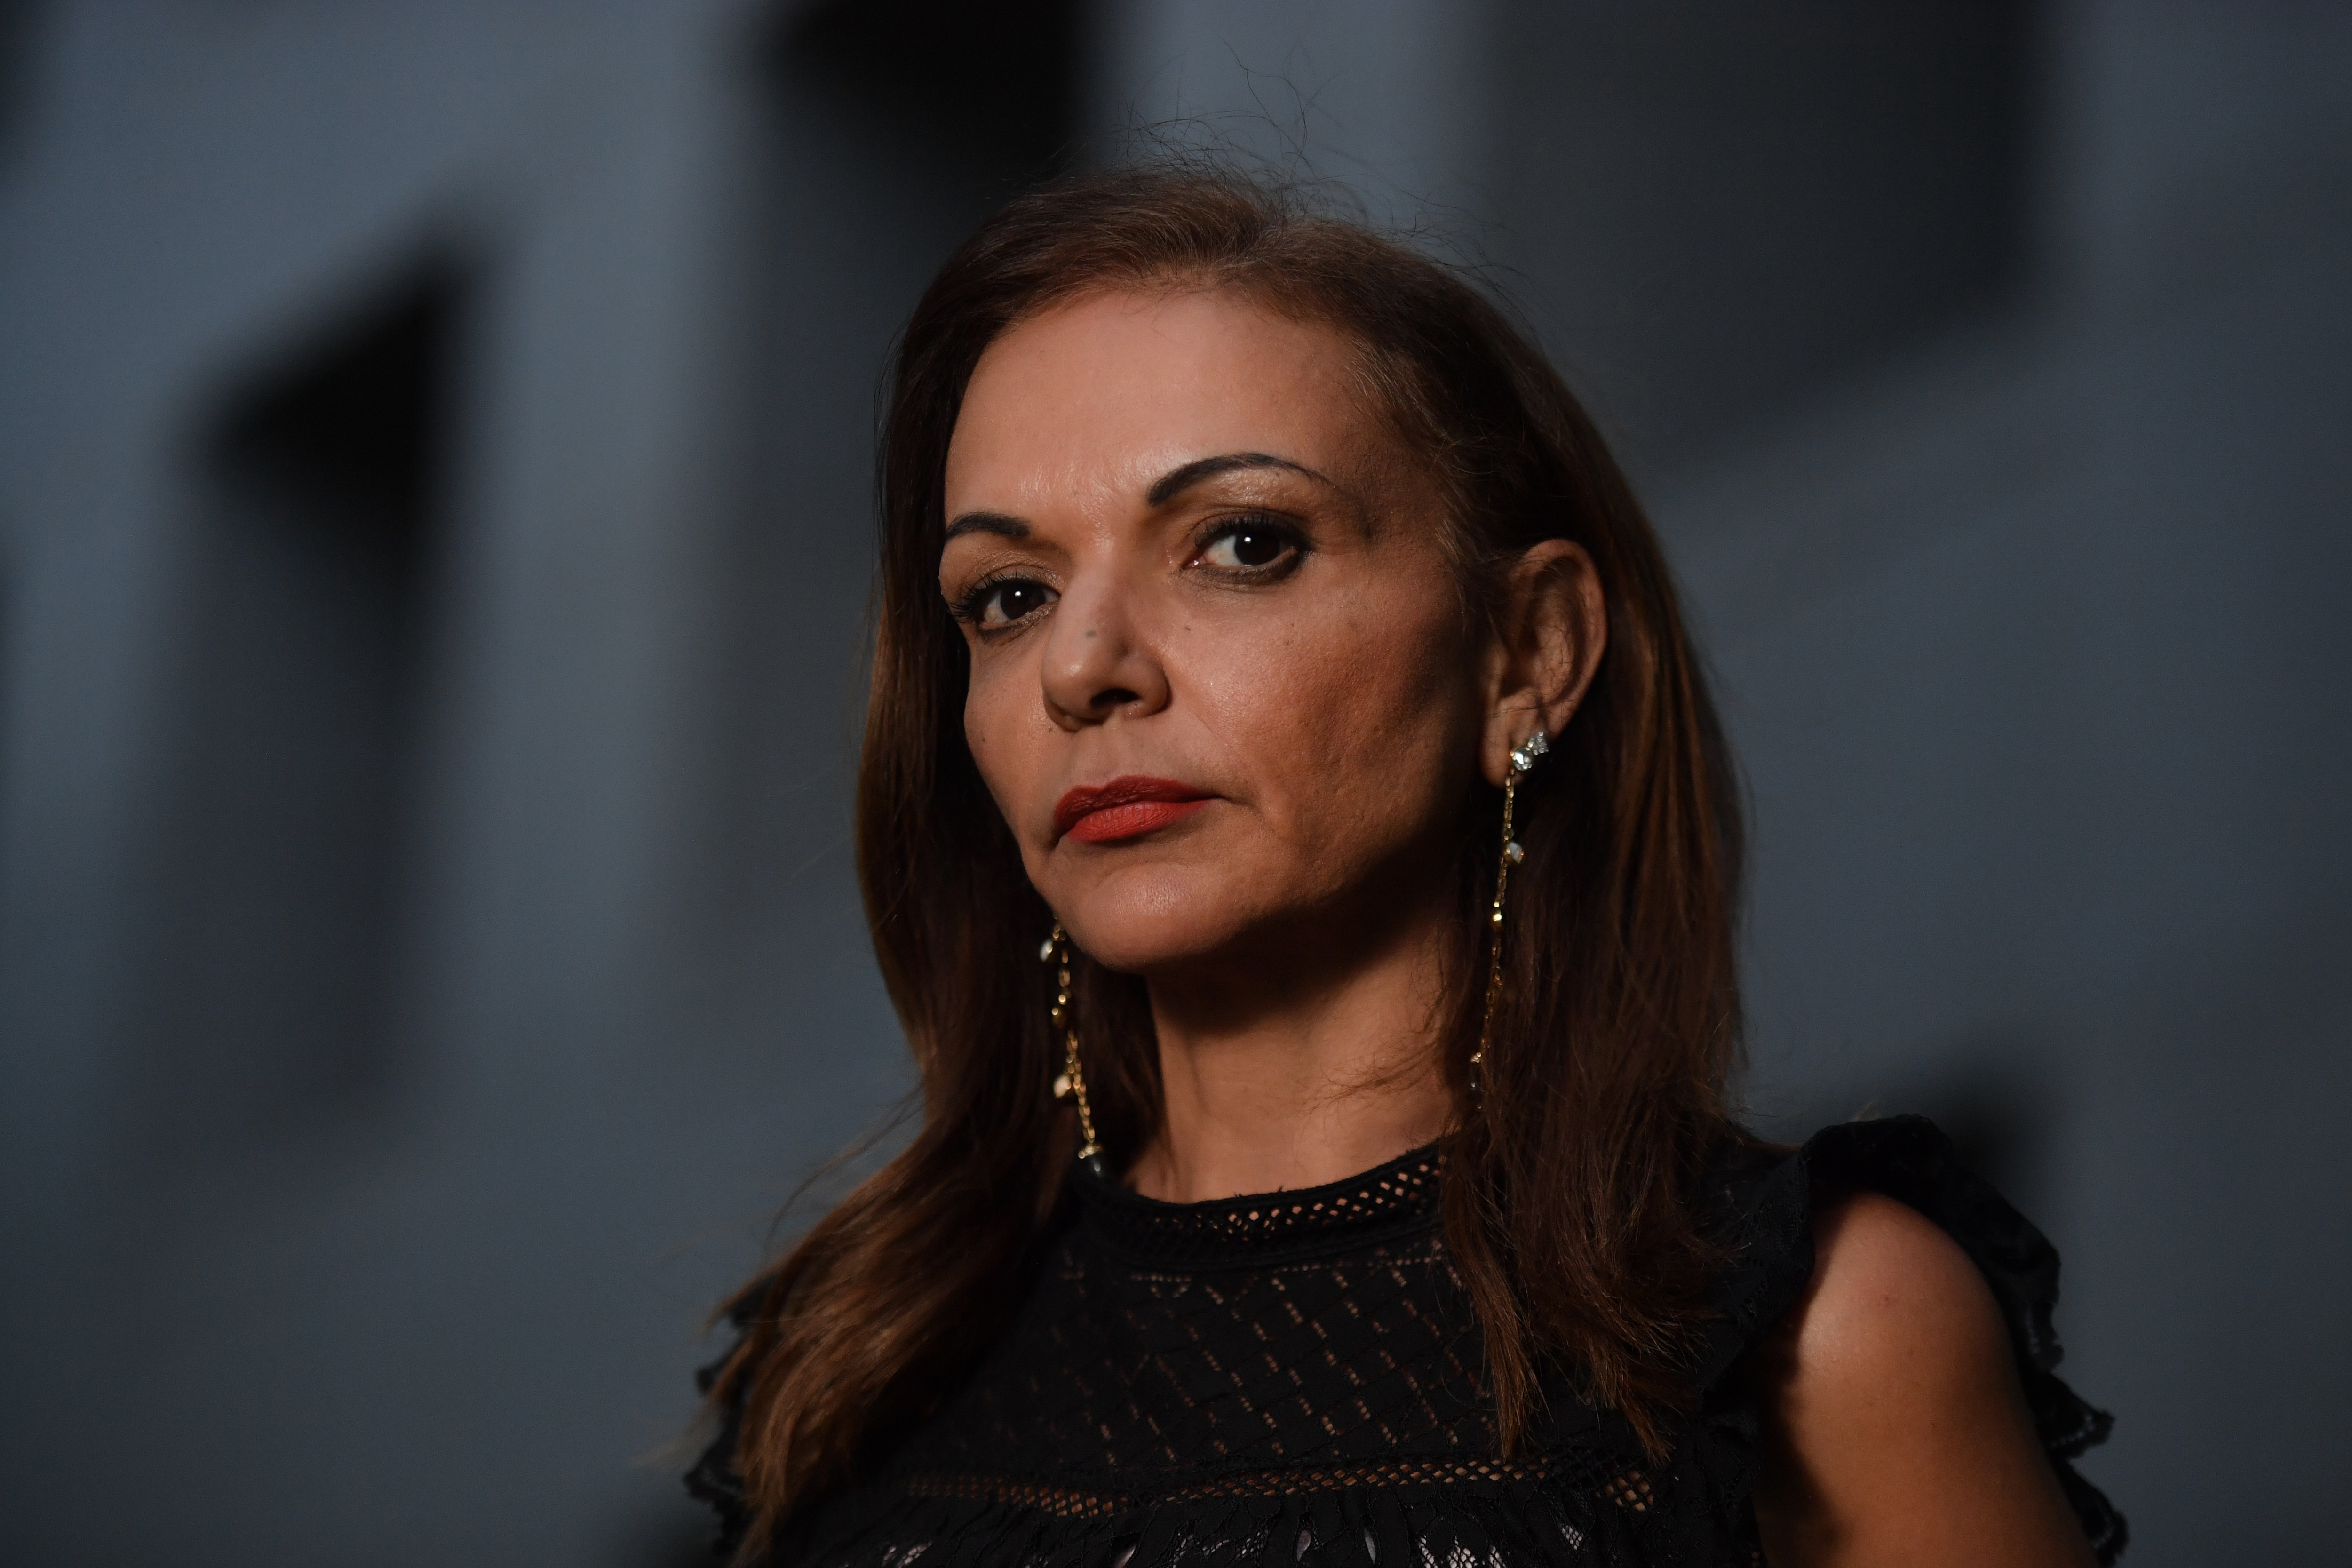 Labor member Anne Aly has blasted the decision to parachute Senator Keneally into the seat of Fowler.